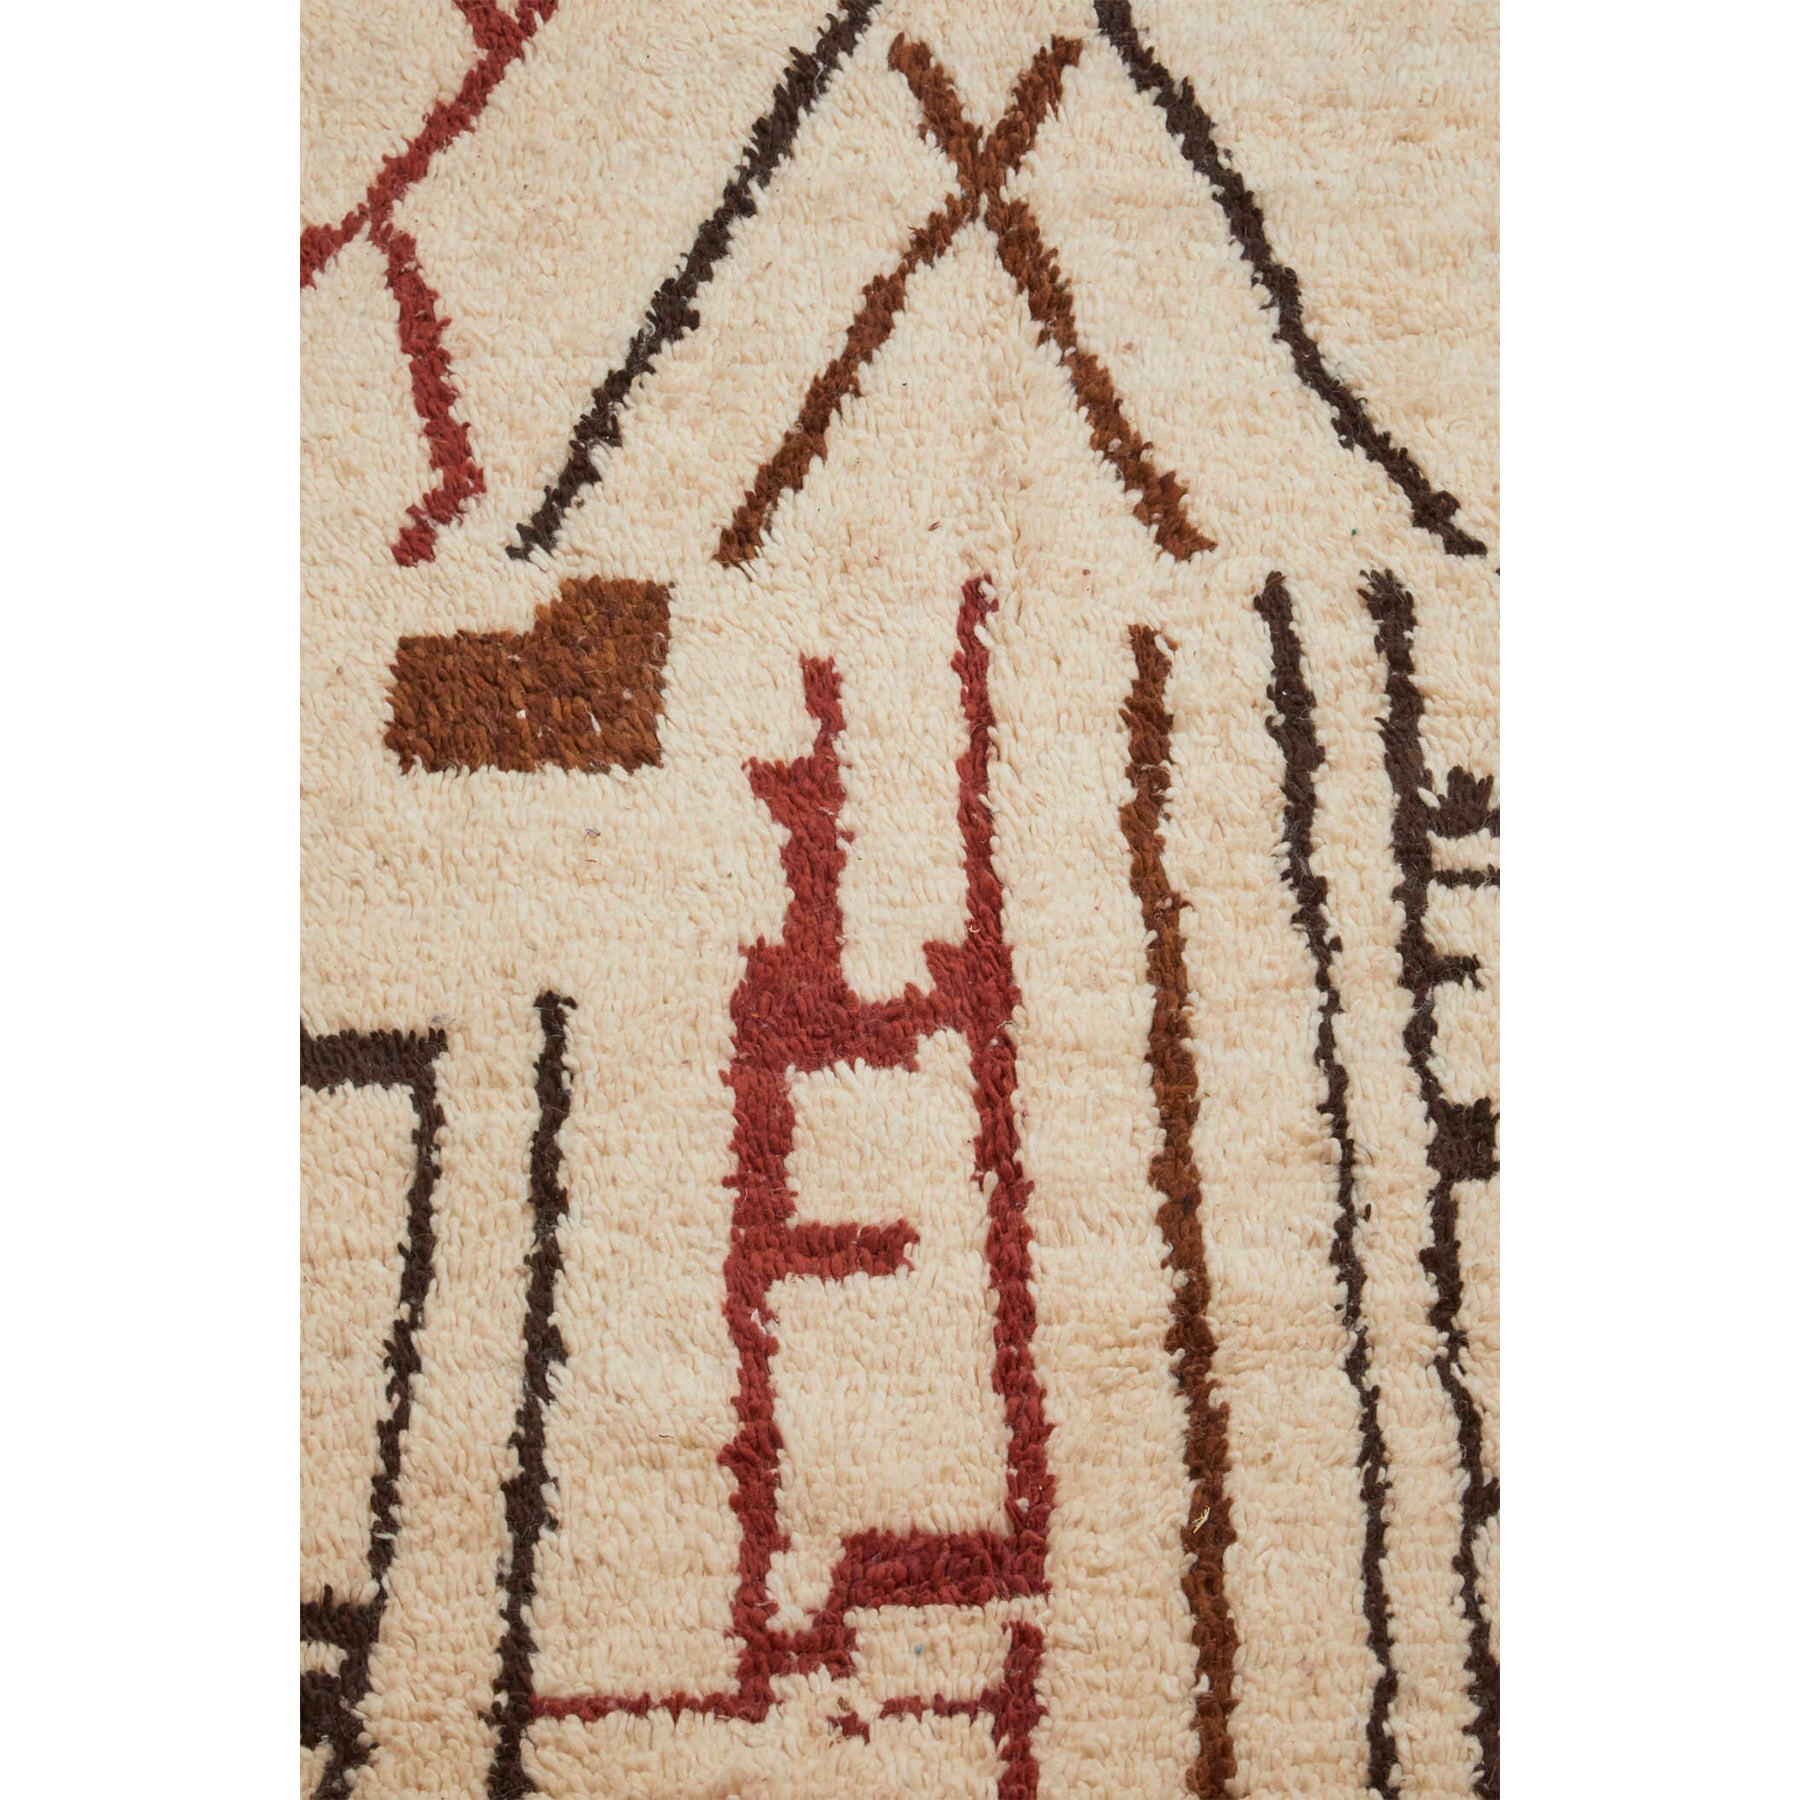 White Moroccan entryway rug with brown, black, and red details - Kantara | Moroccan Rugs